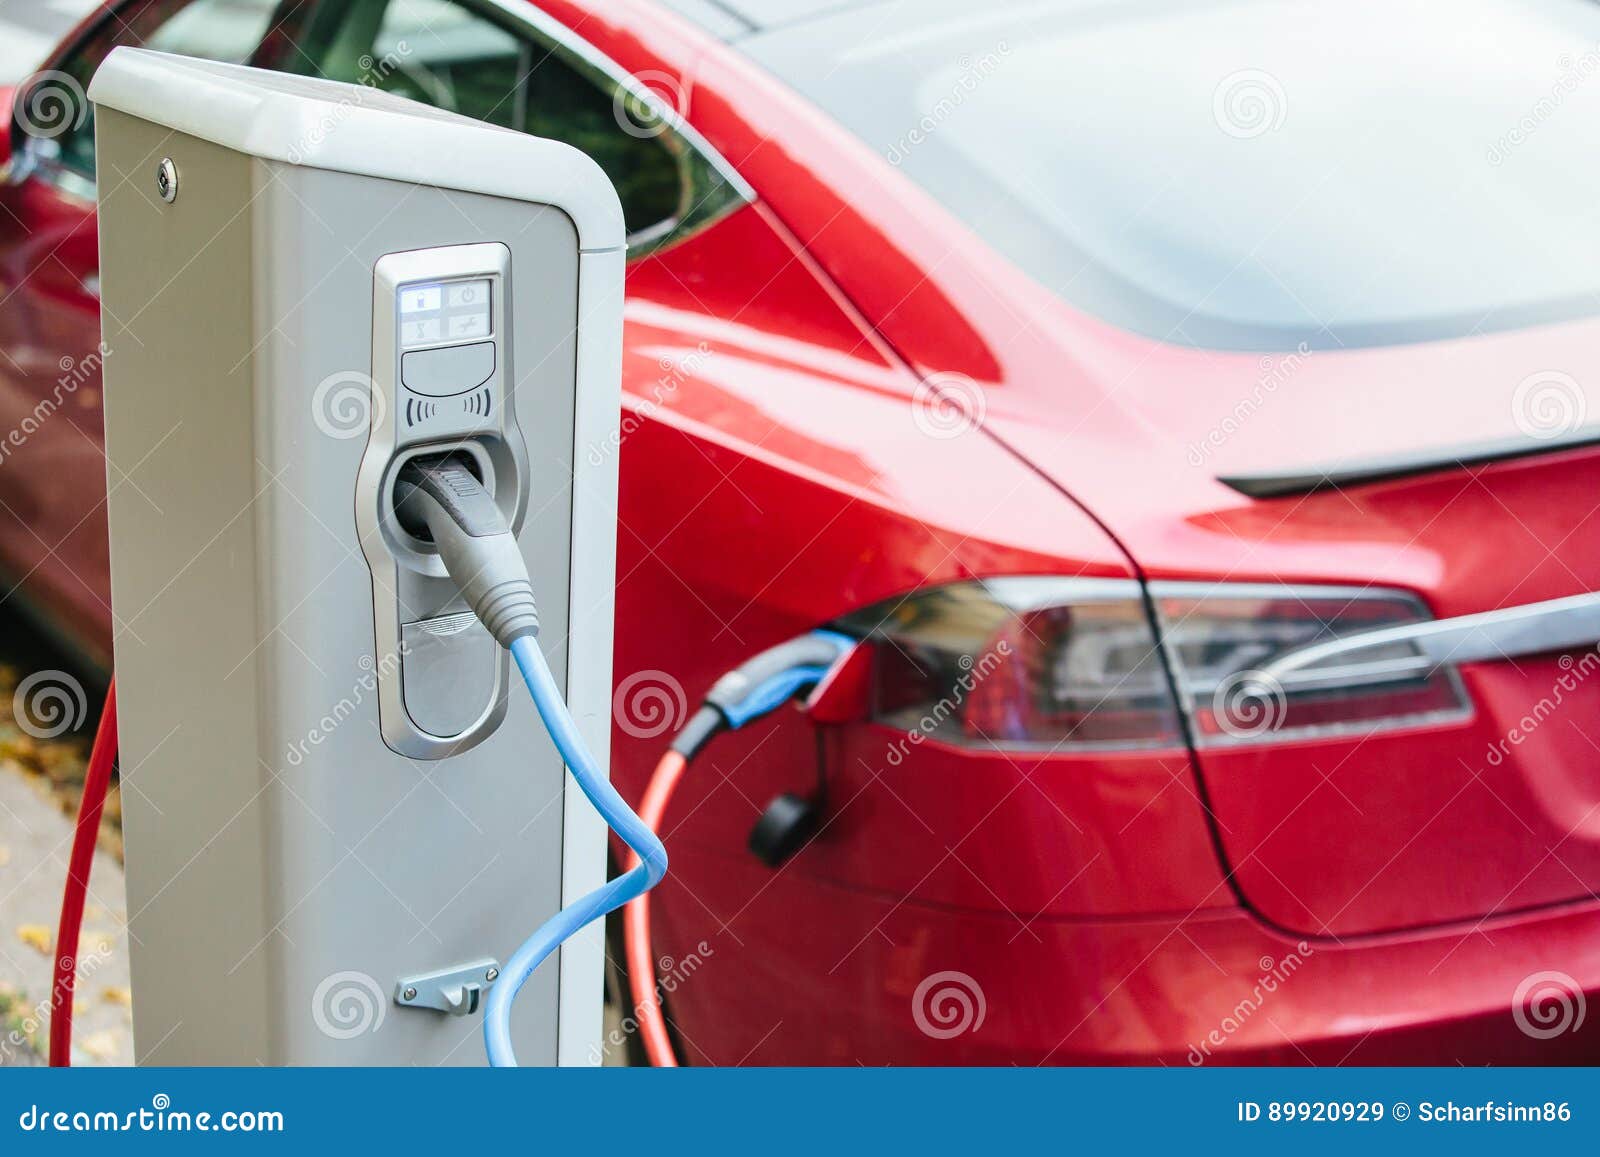 Electric car stock image. Image of charger, parking, electricity - 89920929